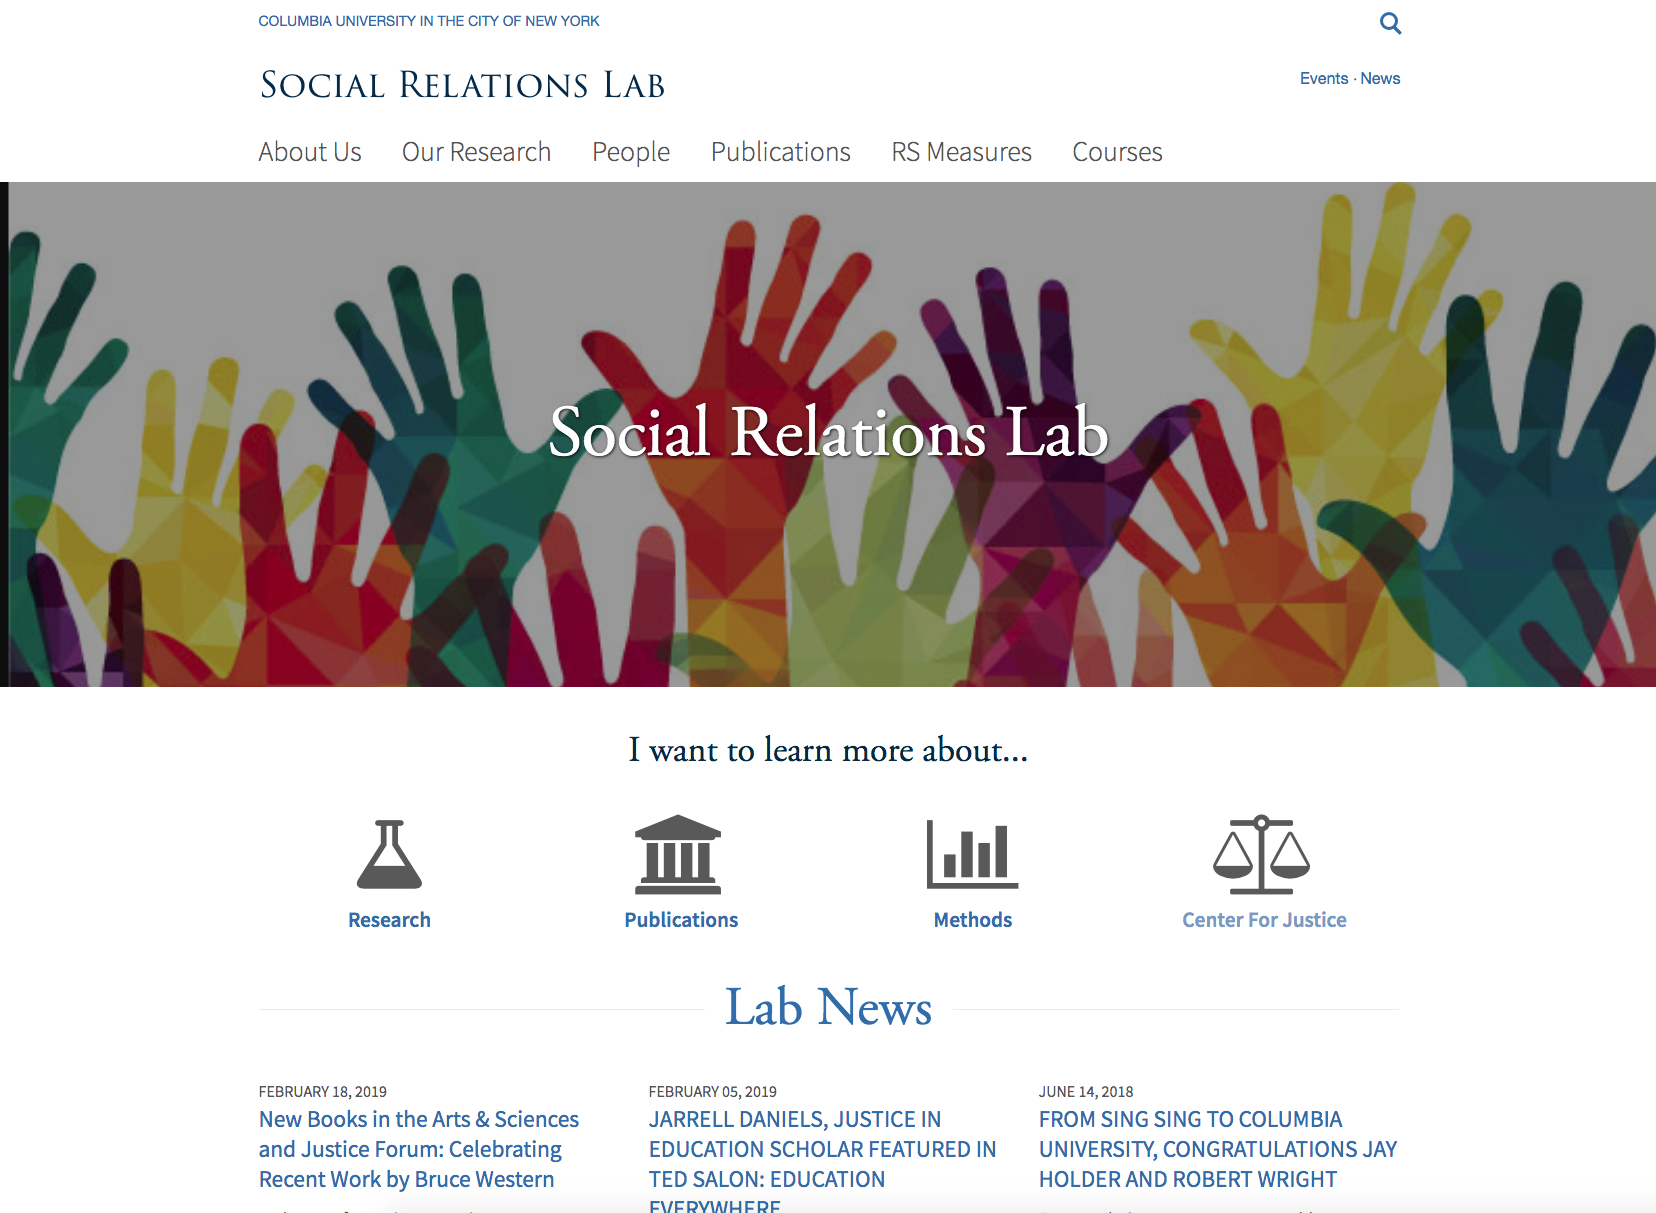 Downey: Social Relations Laboratory